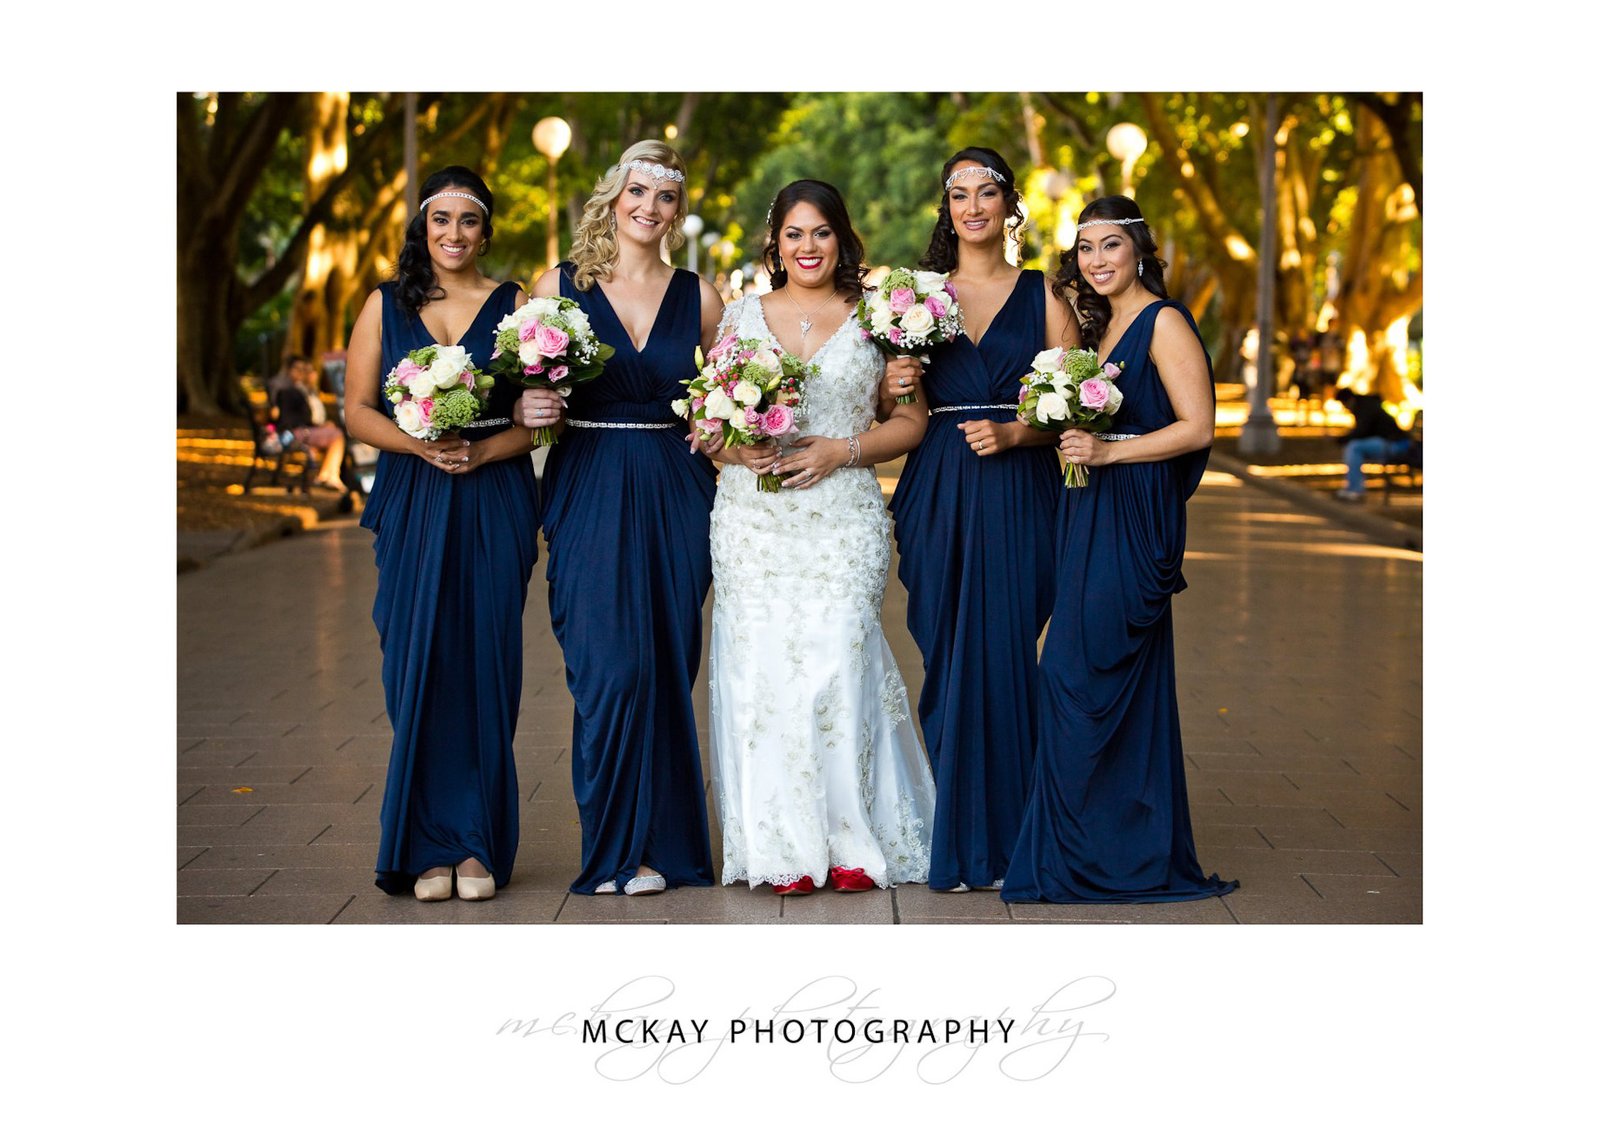 Nicole and bridemaids at Hyde Park photo